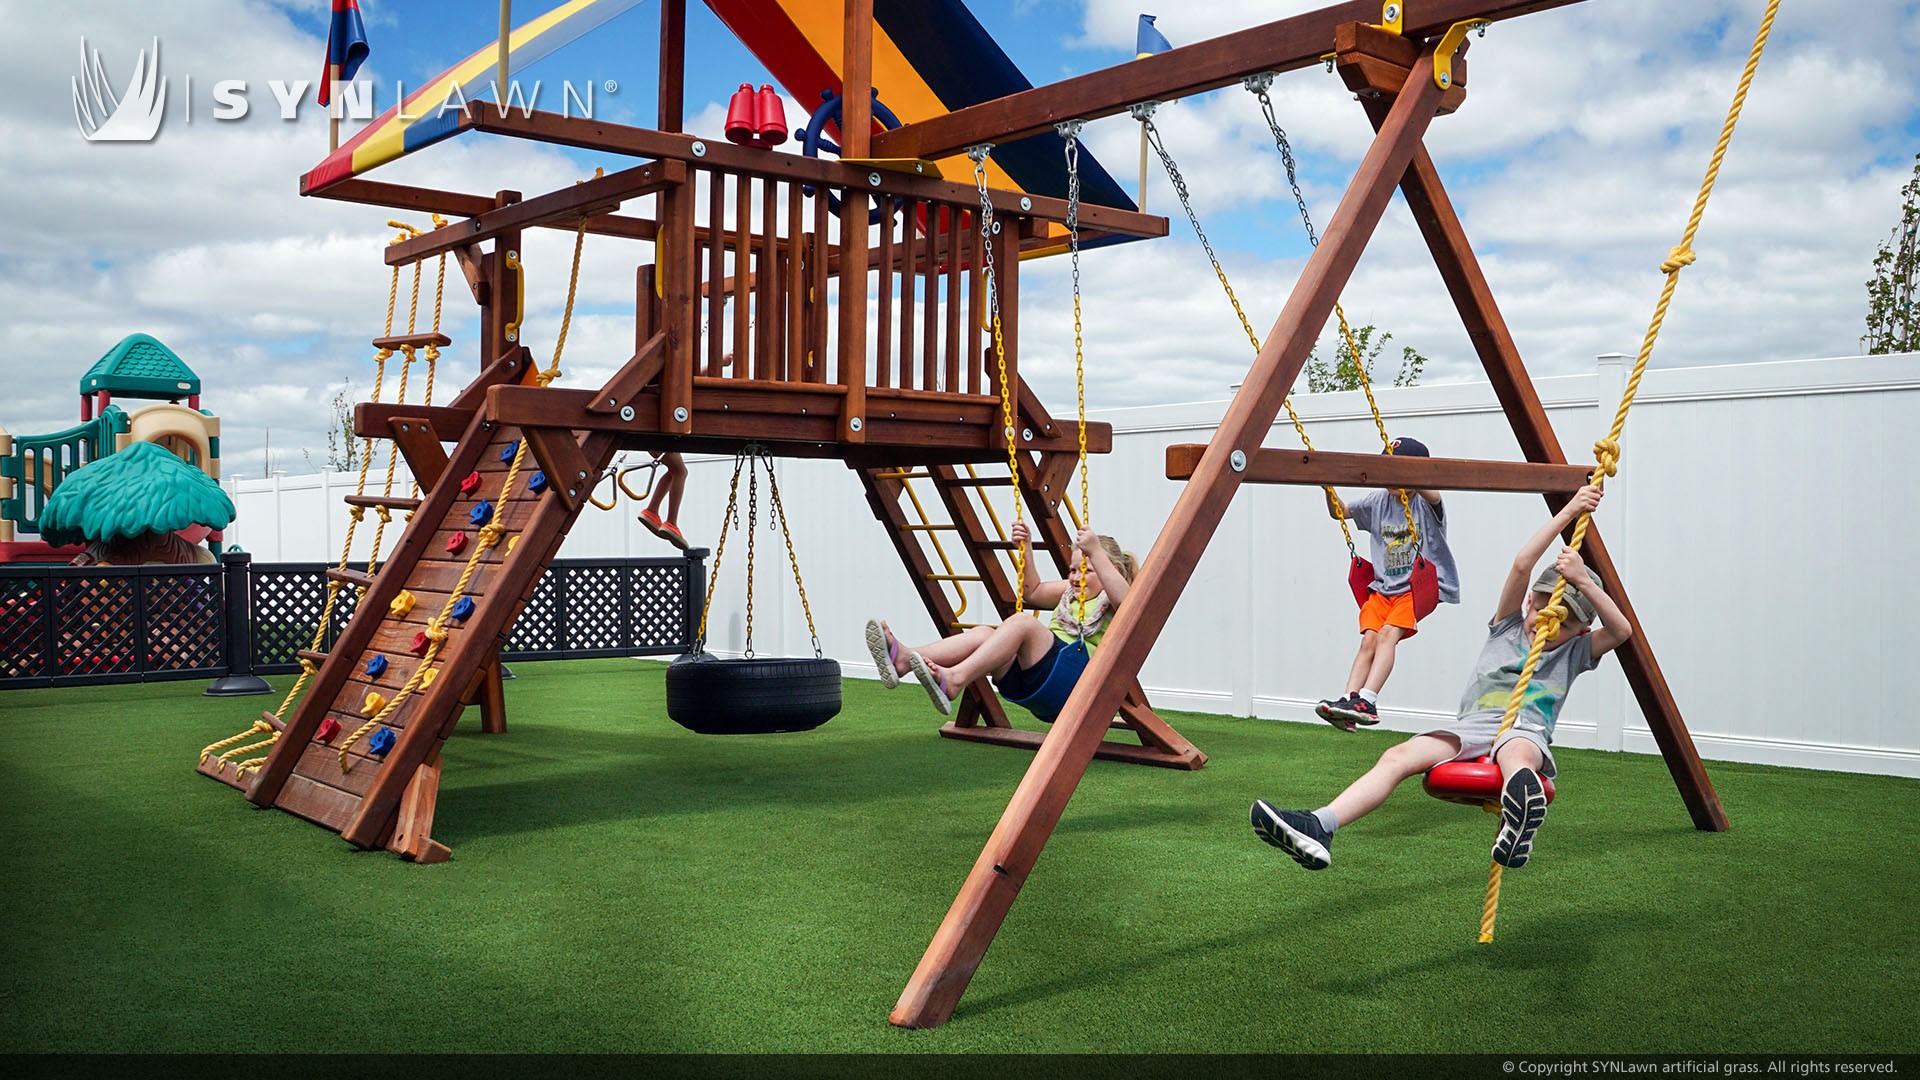 Get Less Skinned Knees and Softer Landings with Artificial Grass in Your Outdoor Play Areas